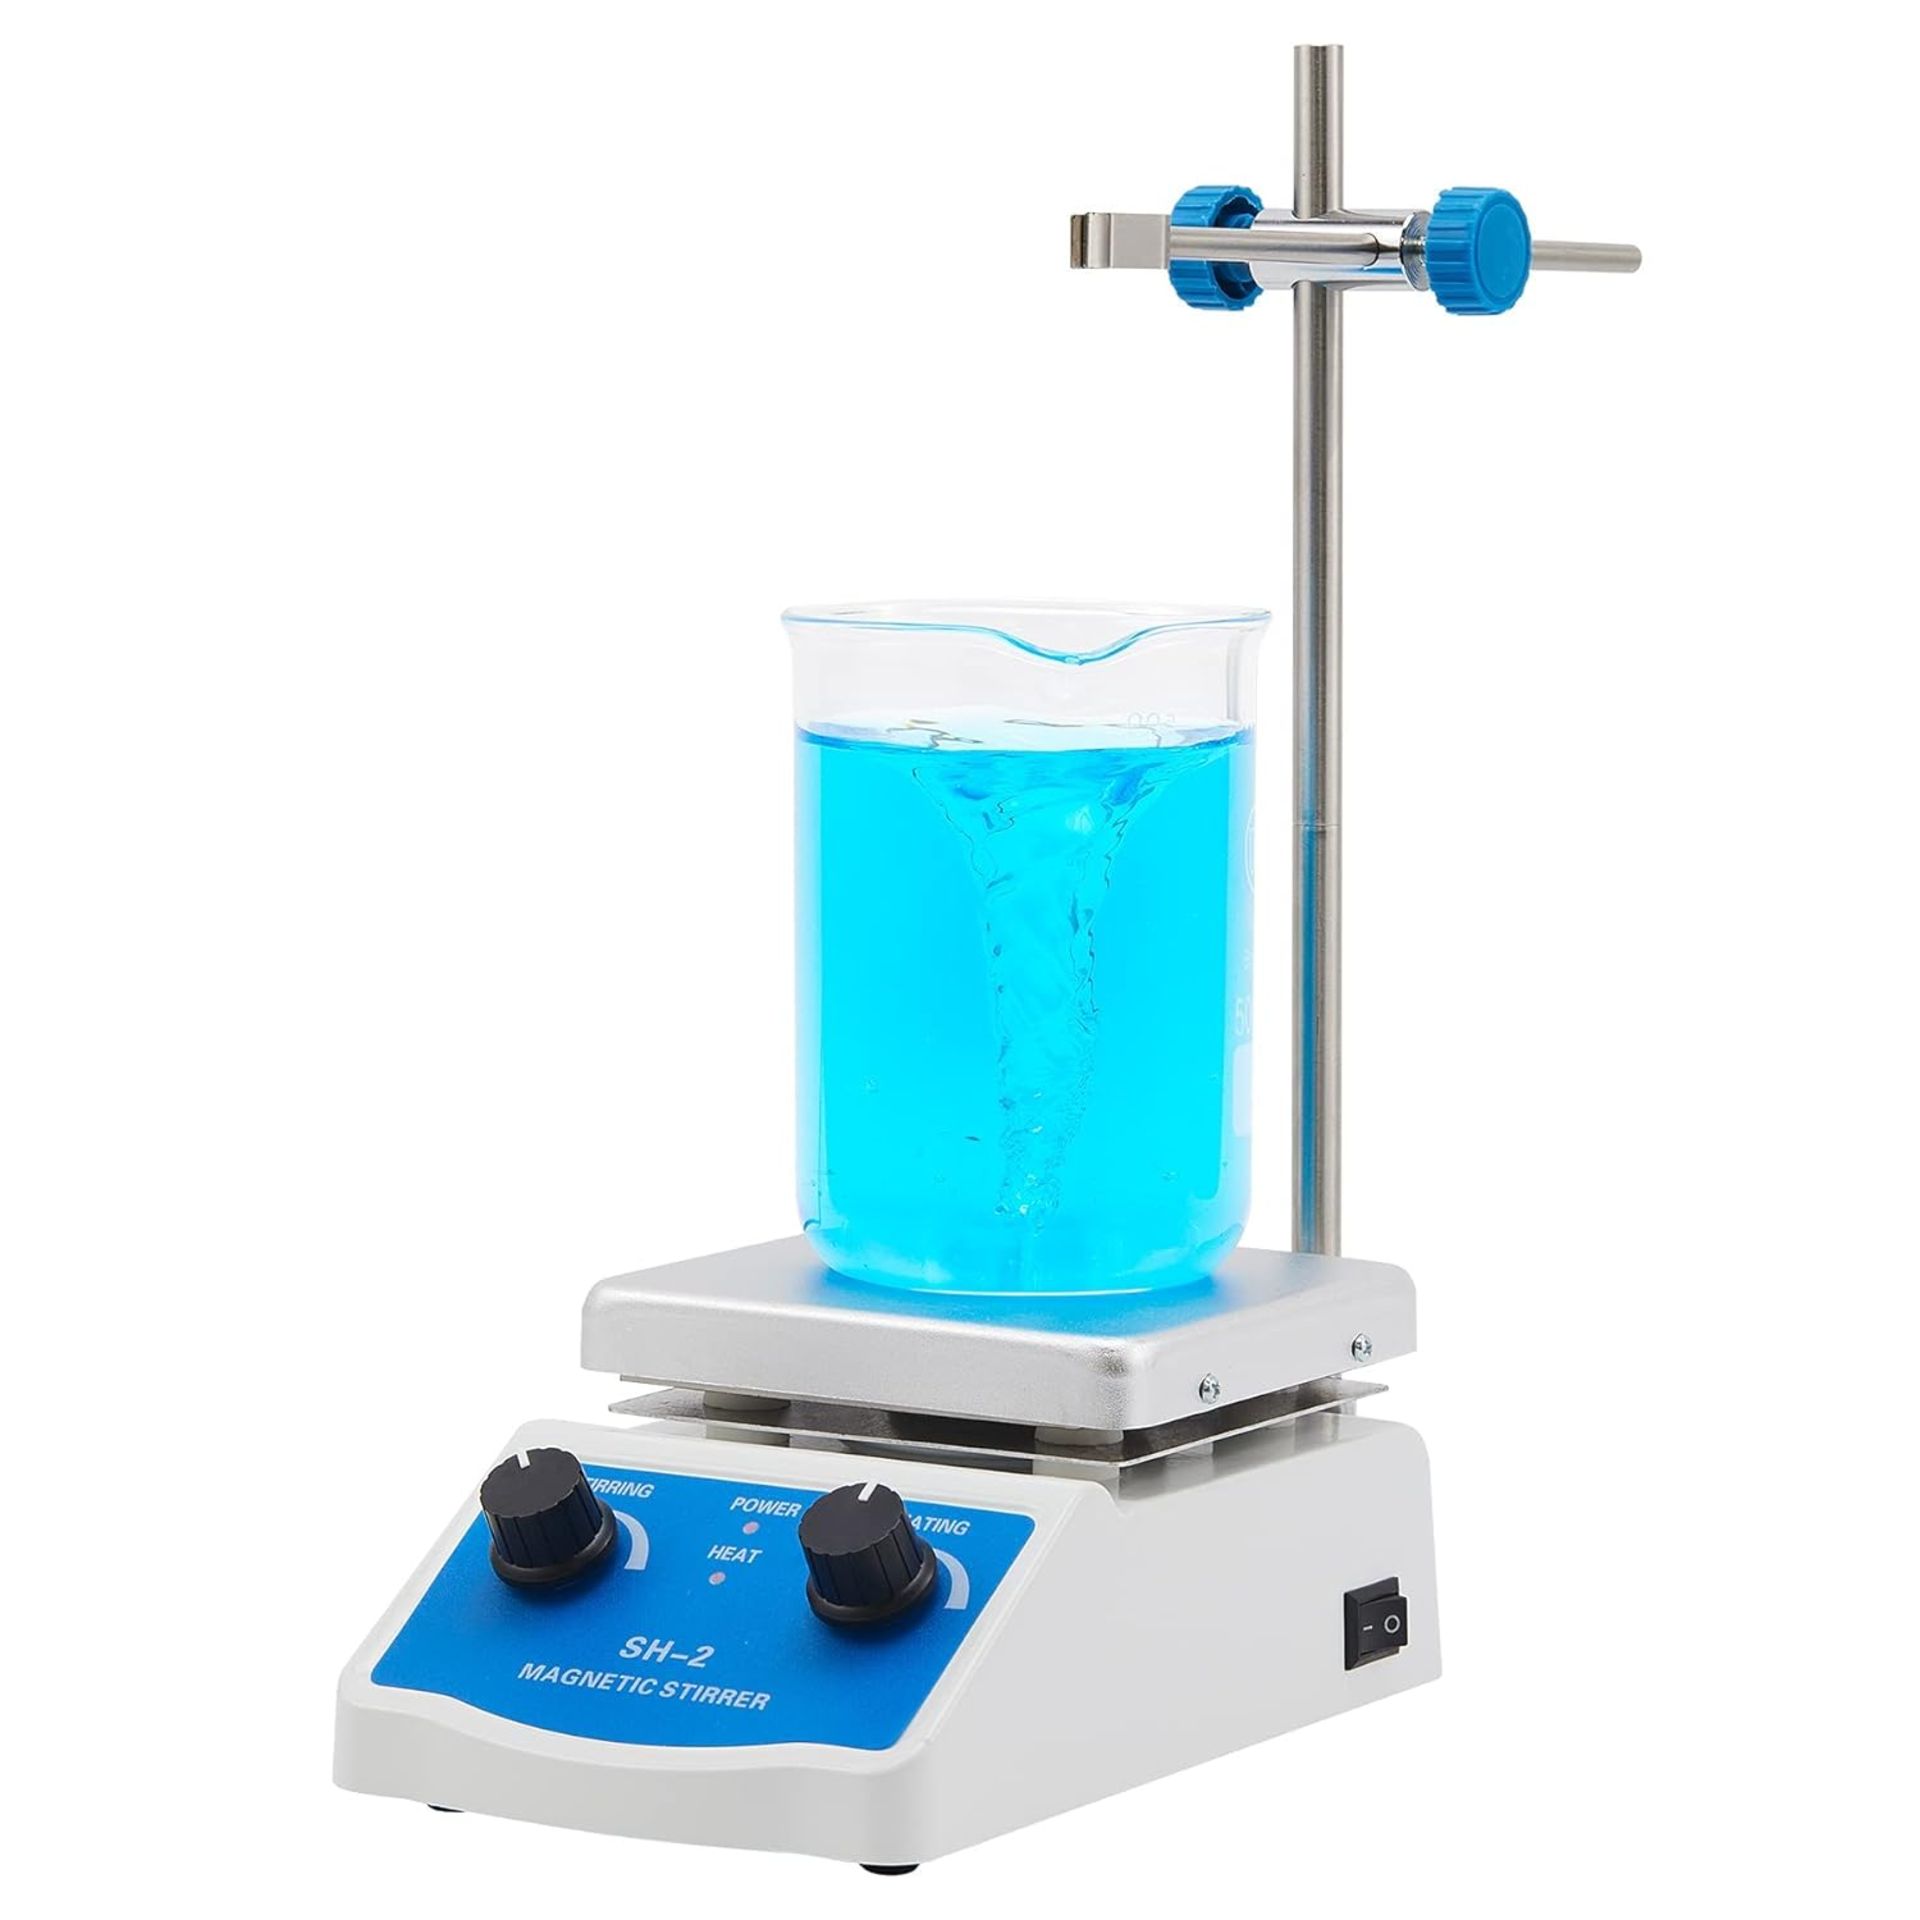 RRP £69.99 CREWORKS Magnetic Stirrer Hotplate 12x12cm Magnetic Mixer with Laboratory Mixer 180W